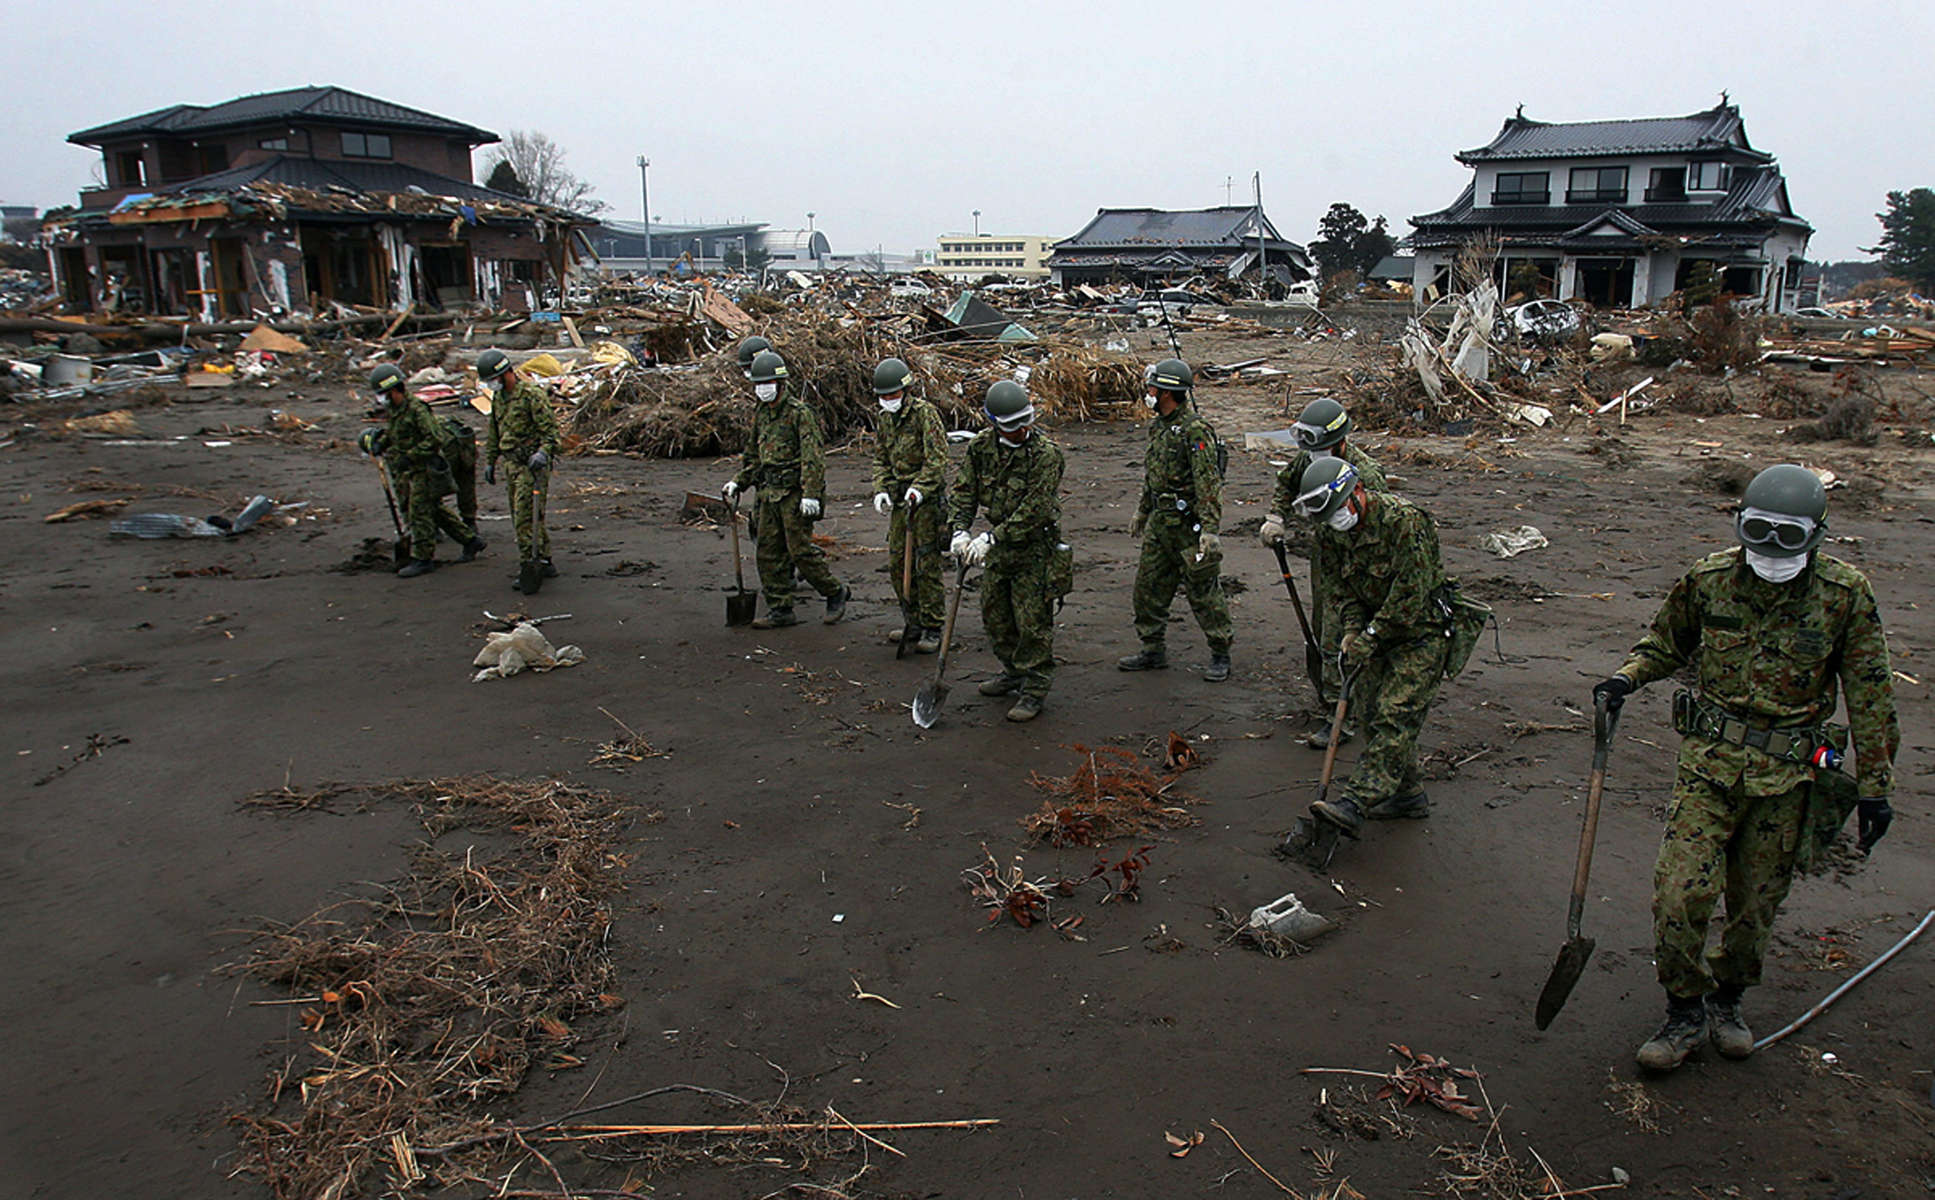 Japan's Ground Self-Defense force members search through debris near the Sendai Airport looking for victims after a 9.0 earthquake and tsunami devastated Sendai in the Miyagi Prefecture of Japan. (The Press-Enterprise/ Mark Zaleski)